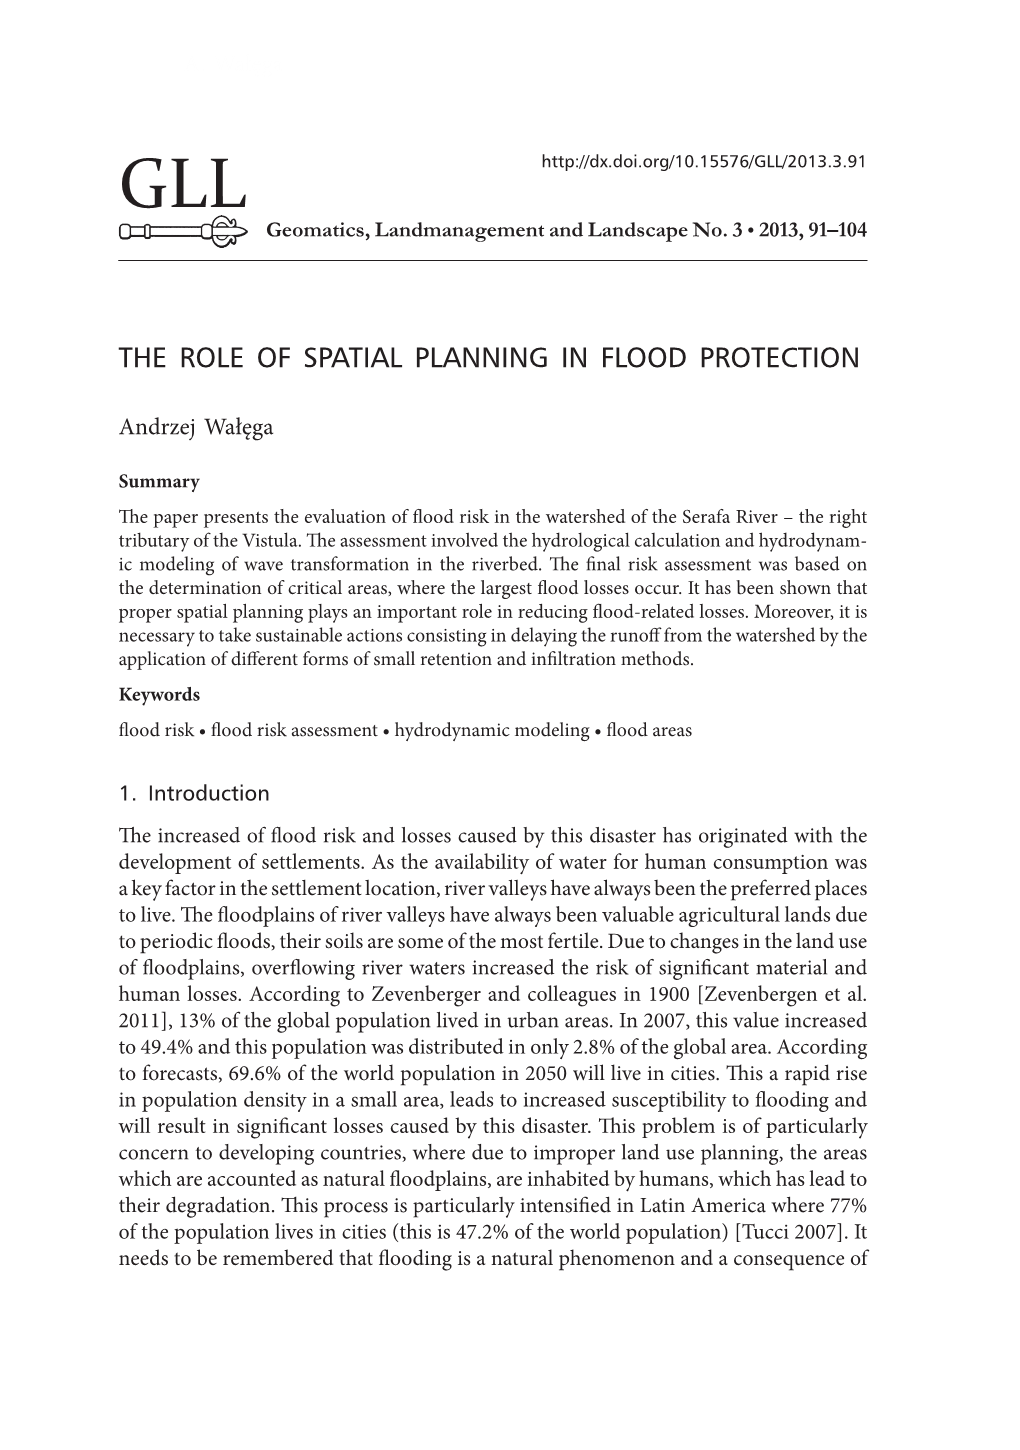 The Role of Spatial Planning in Flood Protection